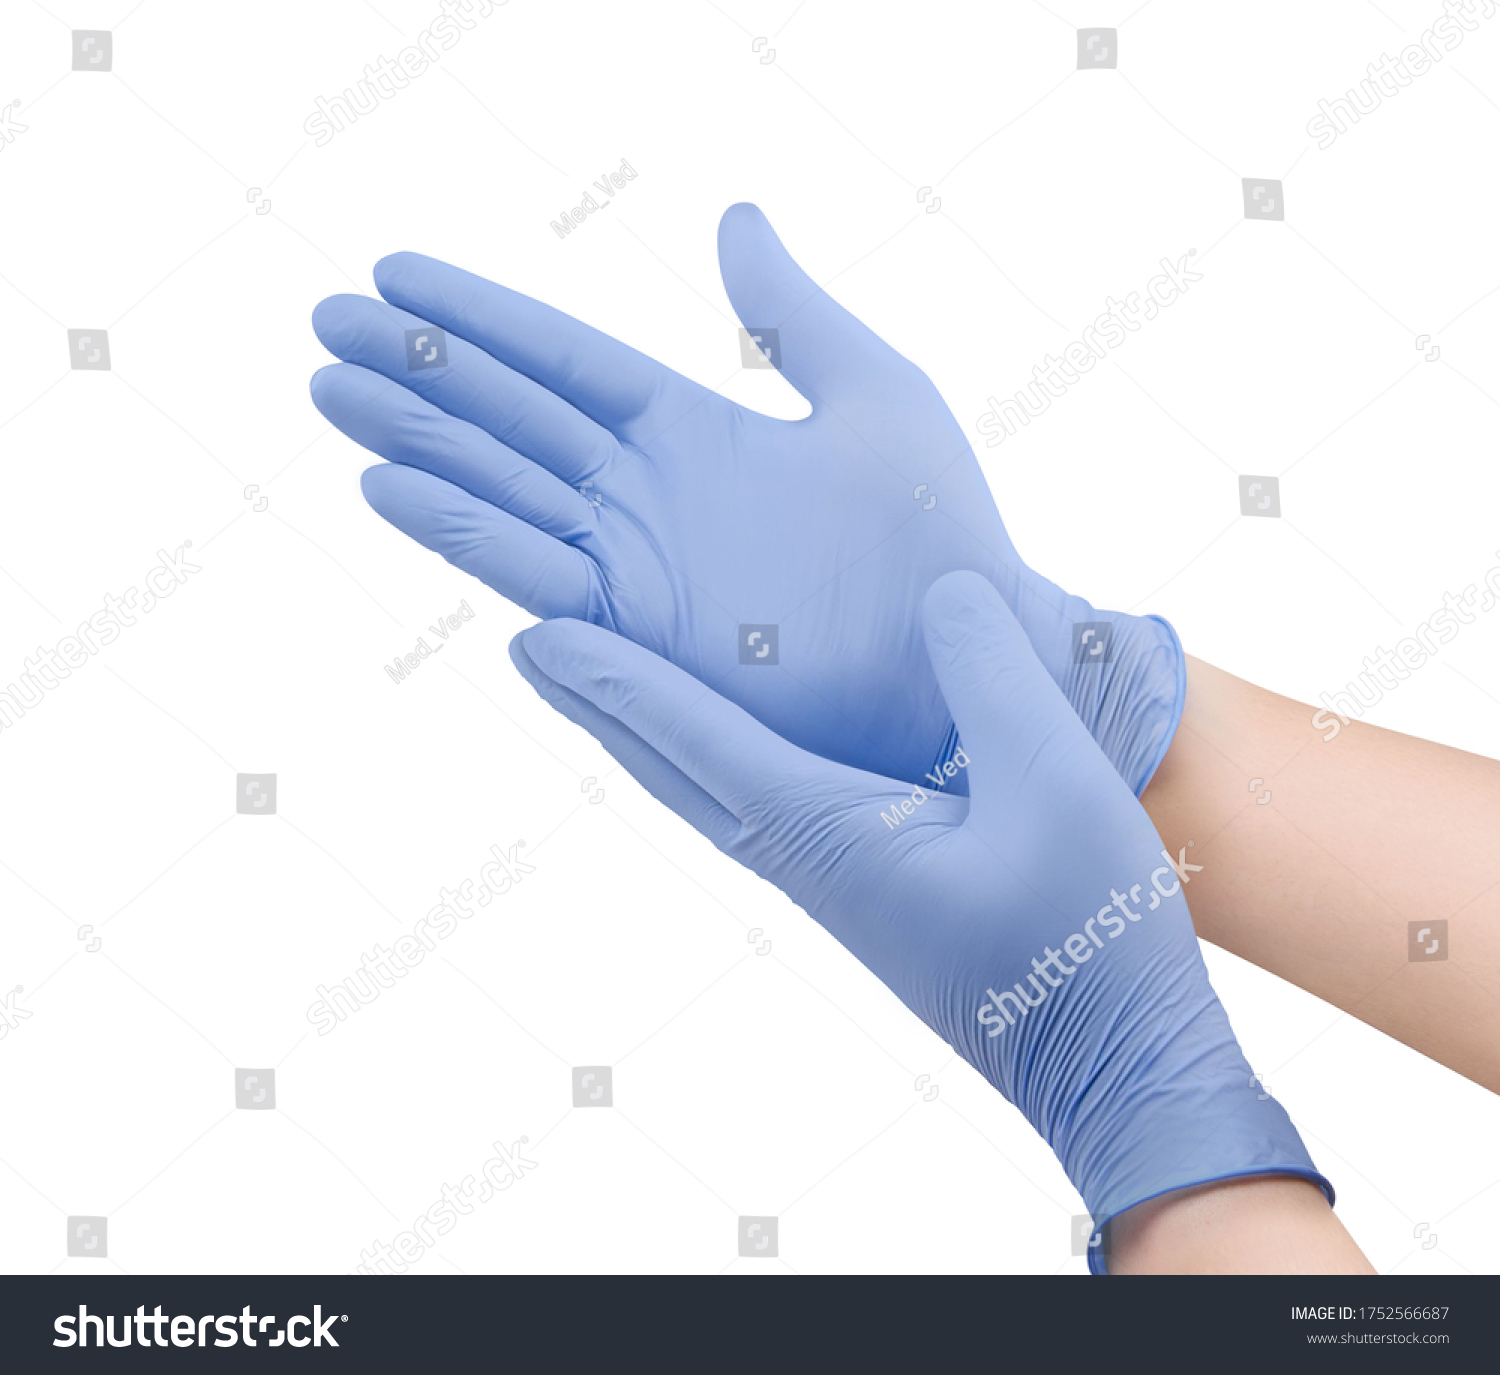 Medical nitrile gloves.Two blue surgical gloves isolated on white background with hands. Rubber glove manufacturing, human hand is wearing a latex glove. Doctor or nurse putting on protective gloves #1752566687